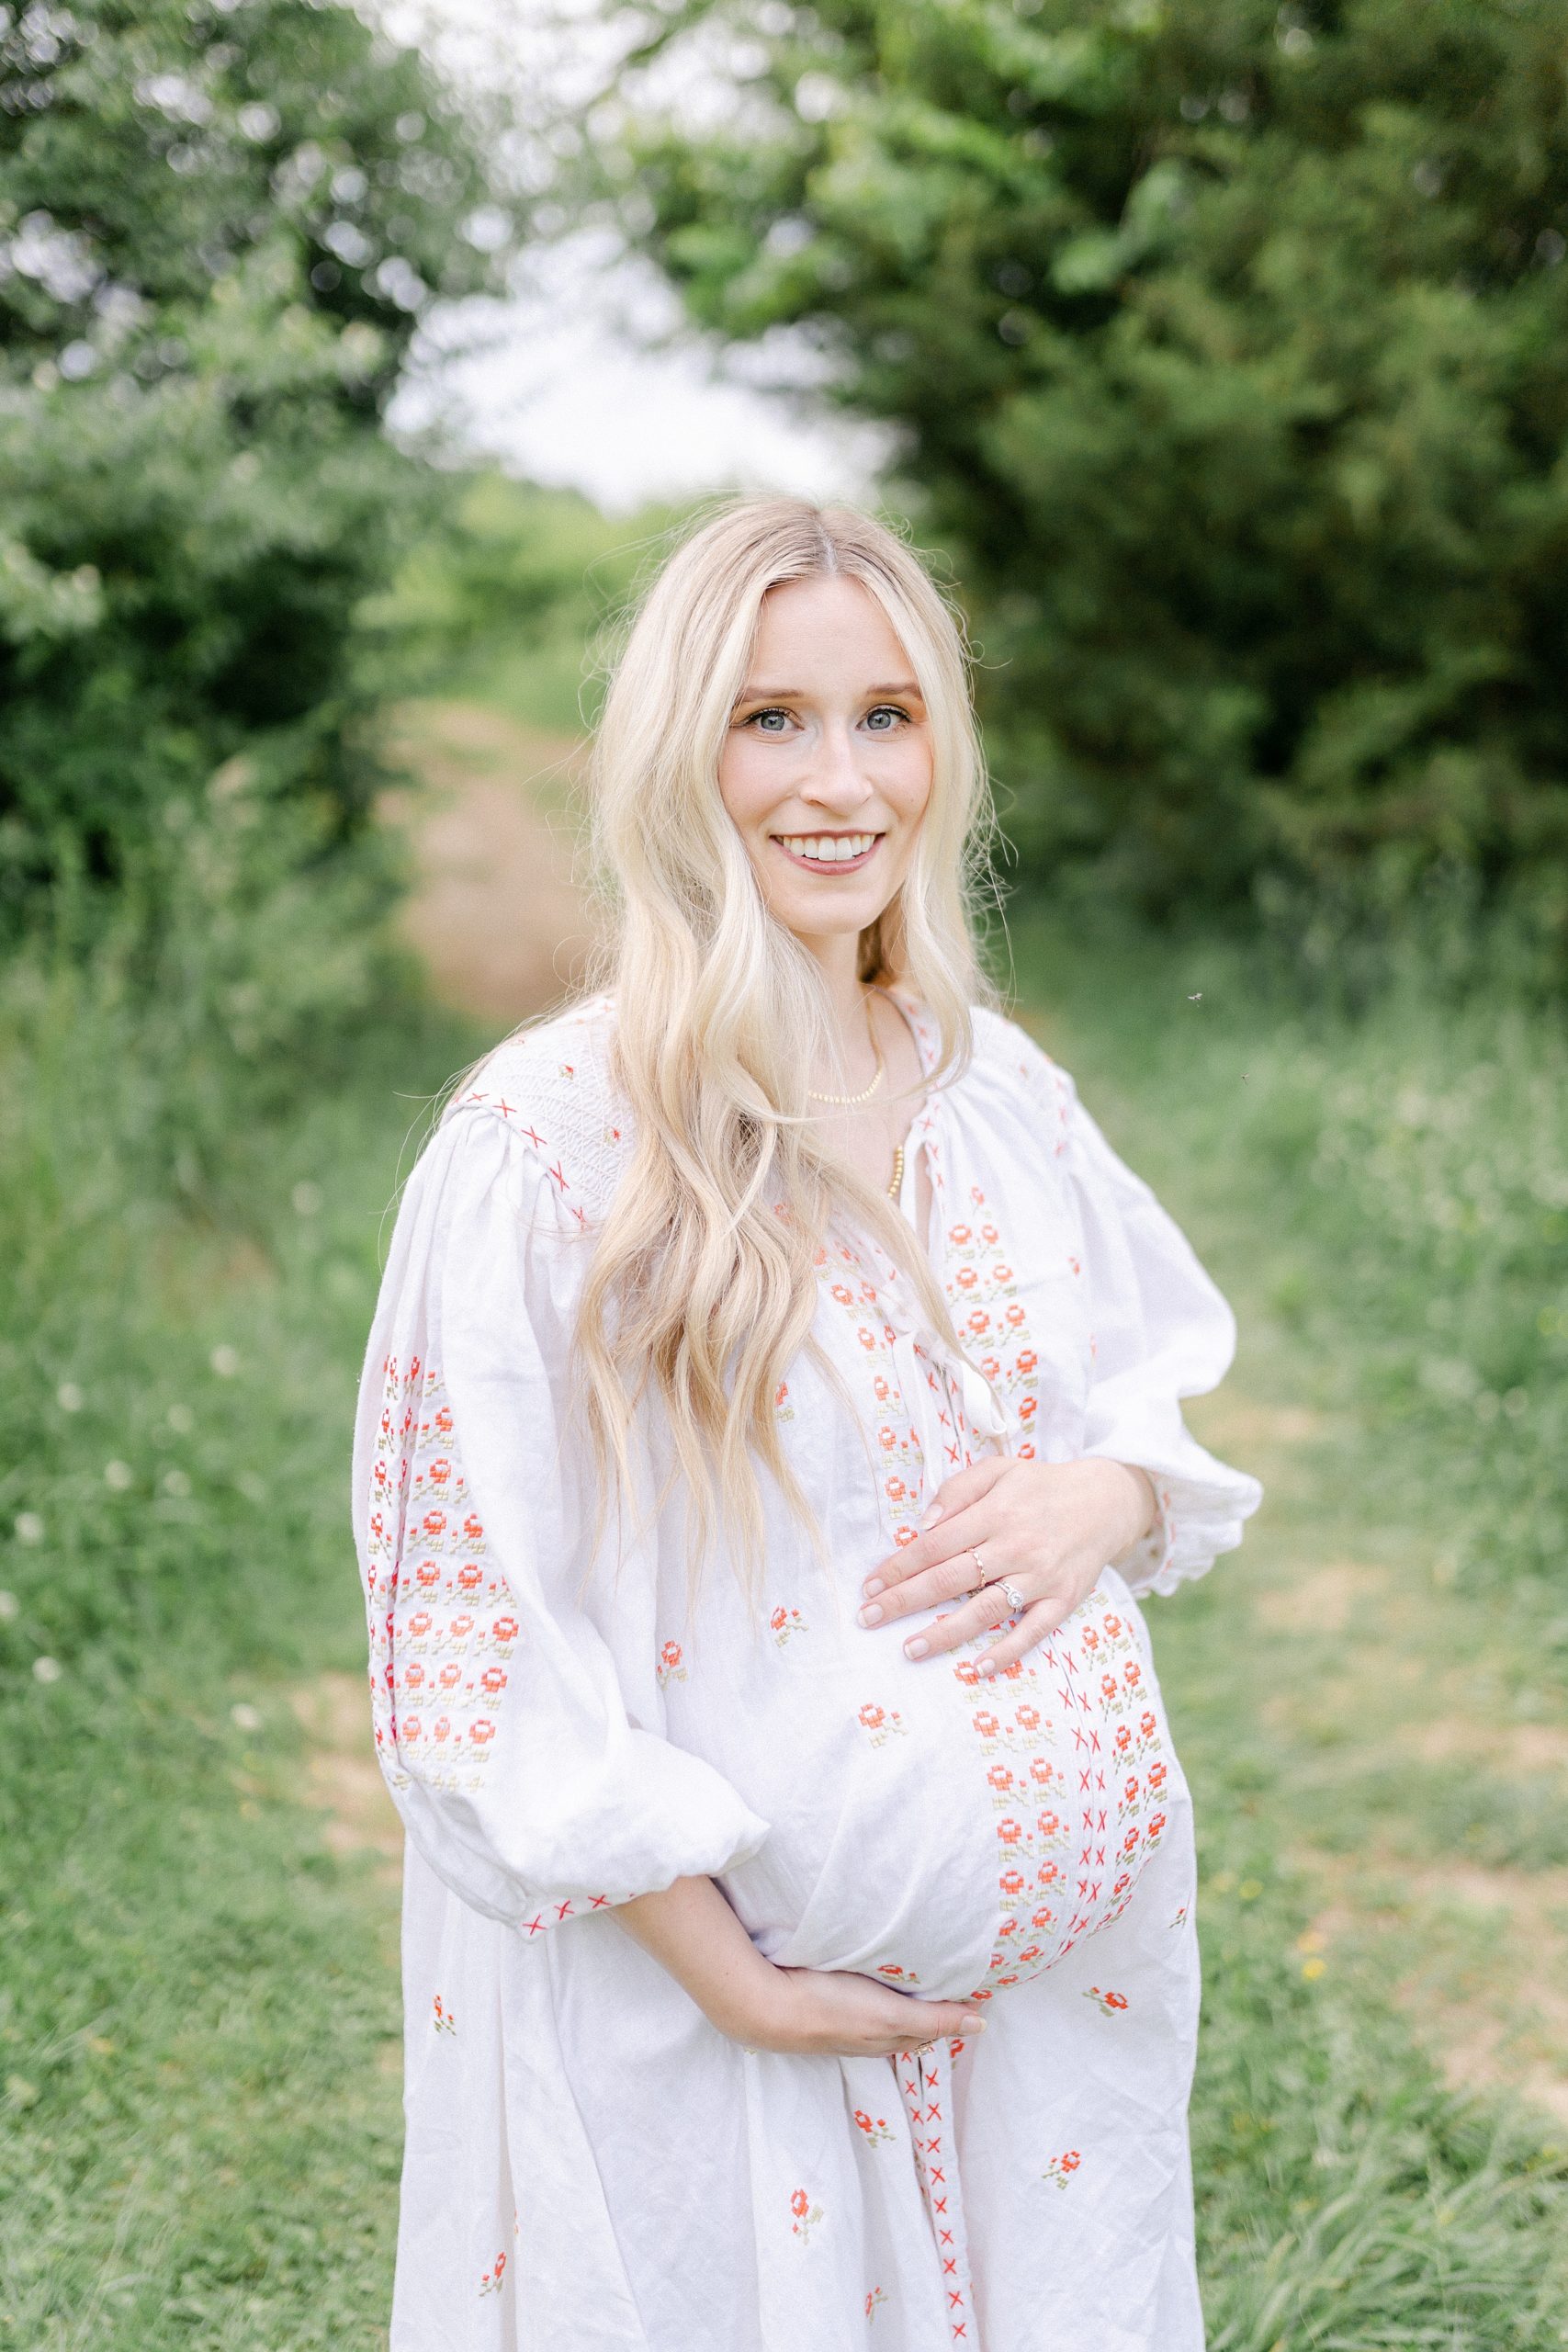 Maternity Session in Brentwood TN by Grace Paul Photography